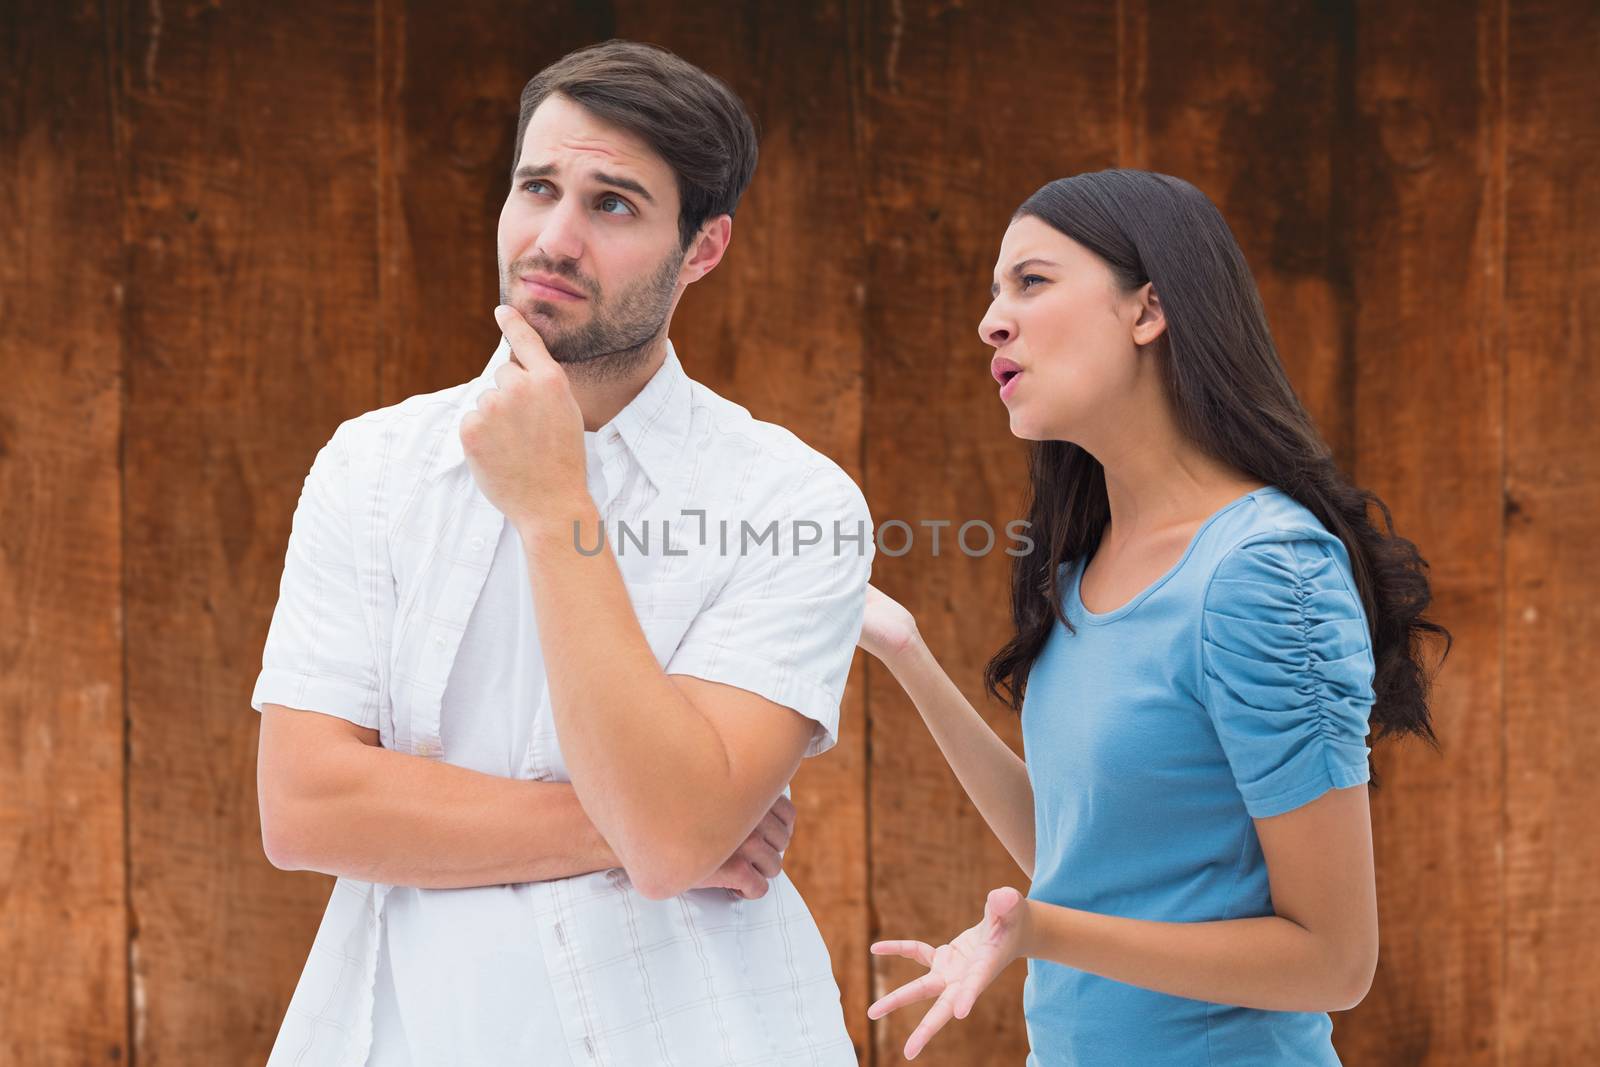 Angry brunette shouting at boyfriend against weathered oak floor boards background